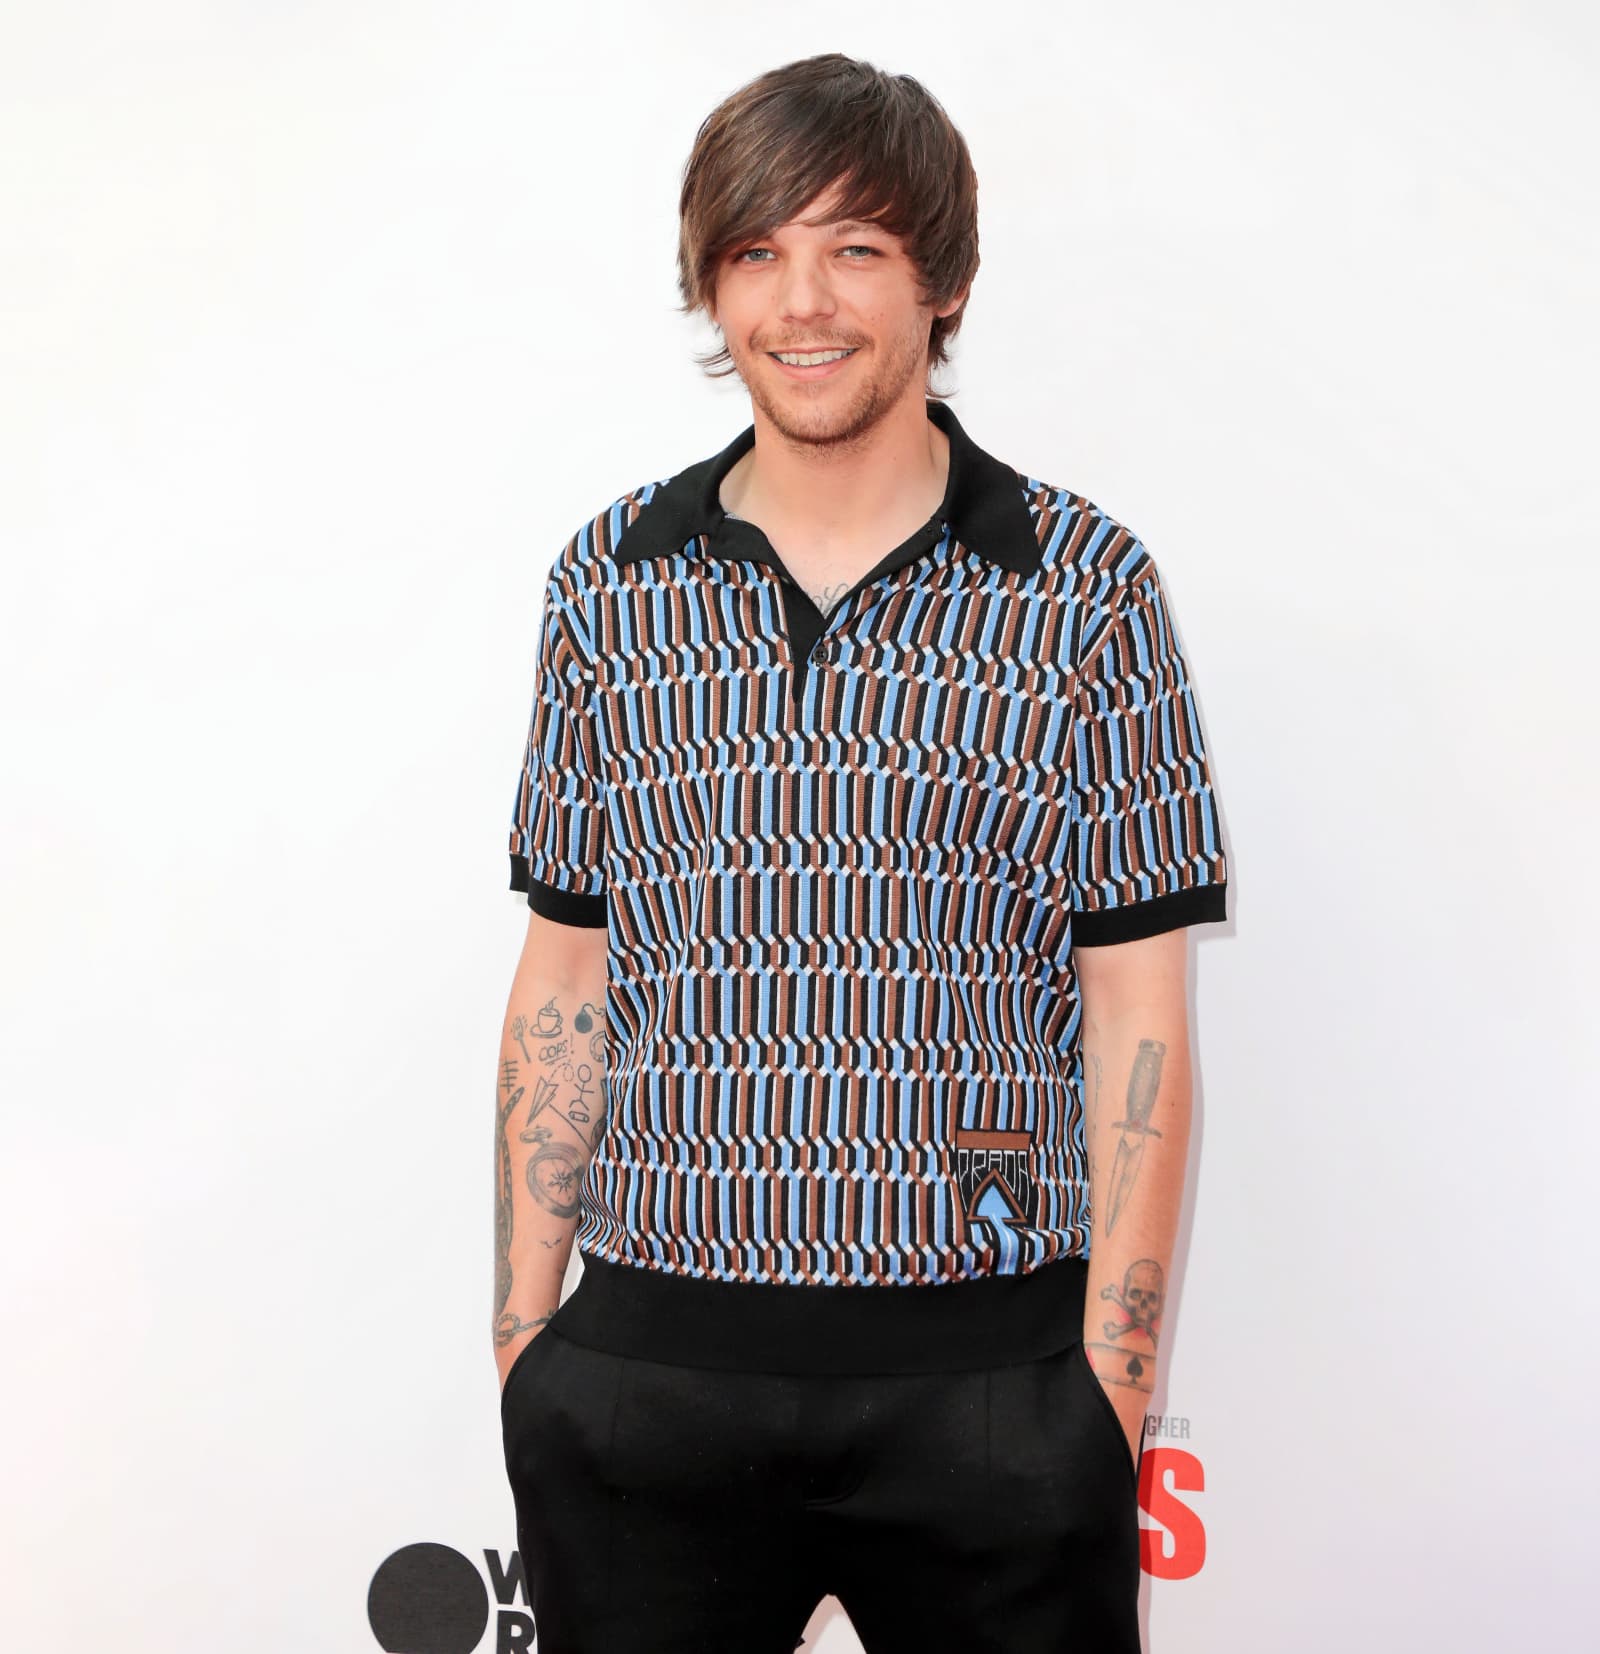 Louis Tomlinson New York Tickets - 6/16/2020 at The ...